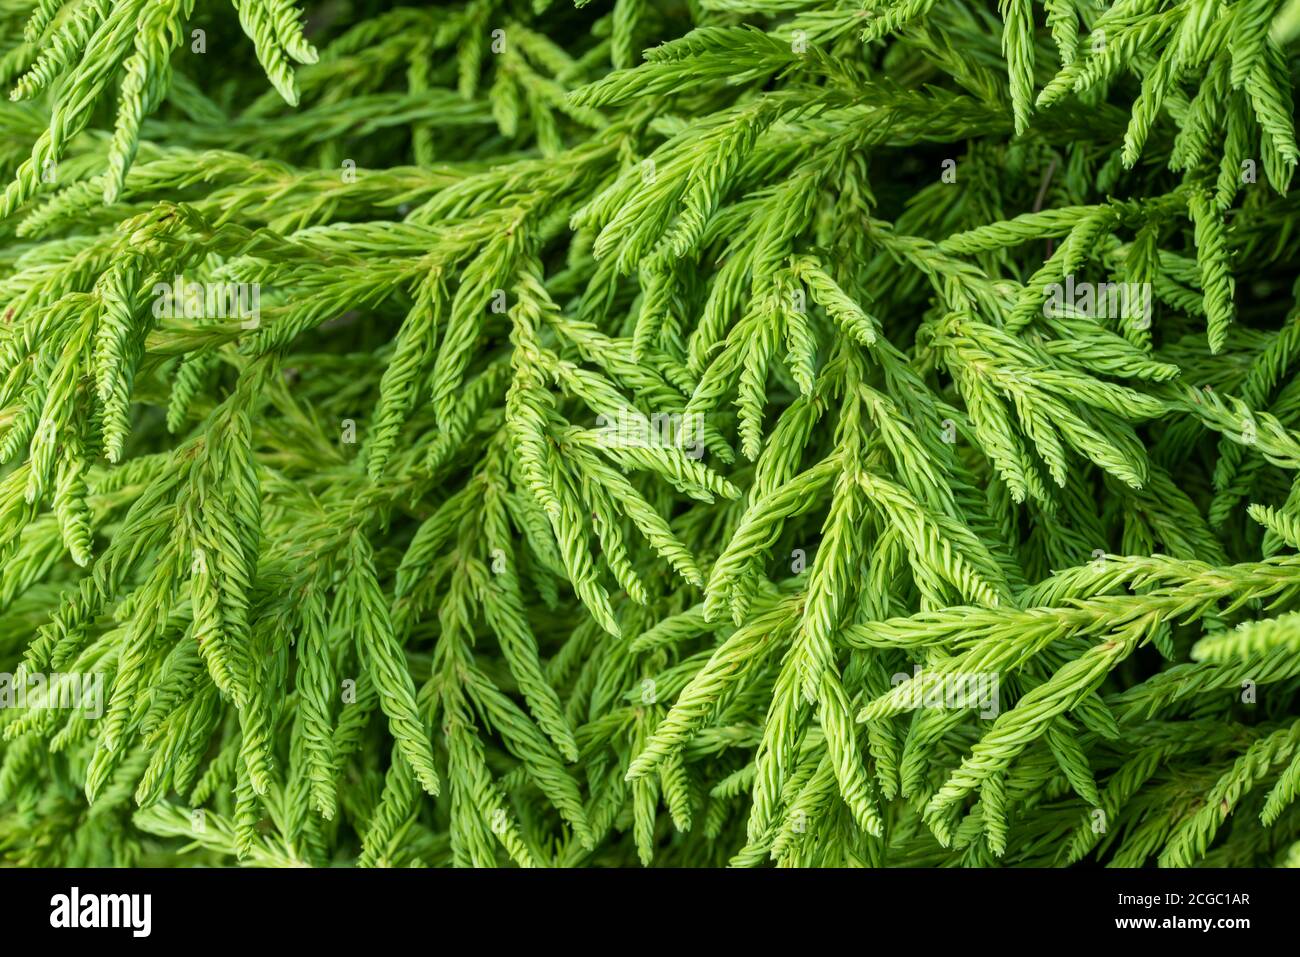 Cryptomeria japonica 'Spiralis'. Close up of branches covered with dense mass of narrow, twisted, spirals of green needles. Stock Photo